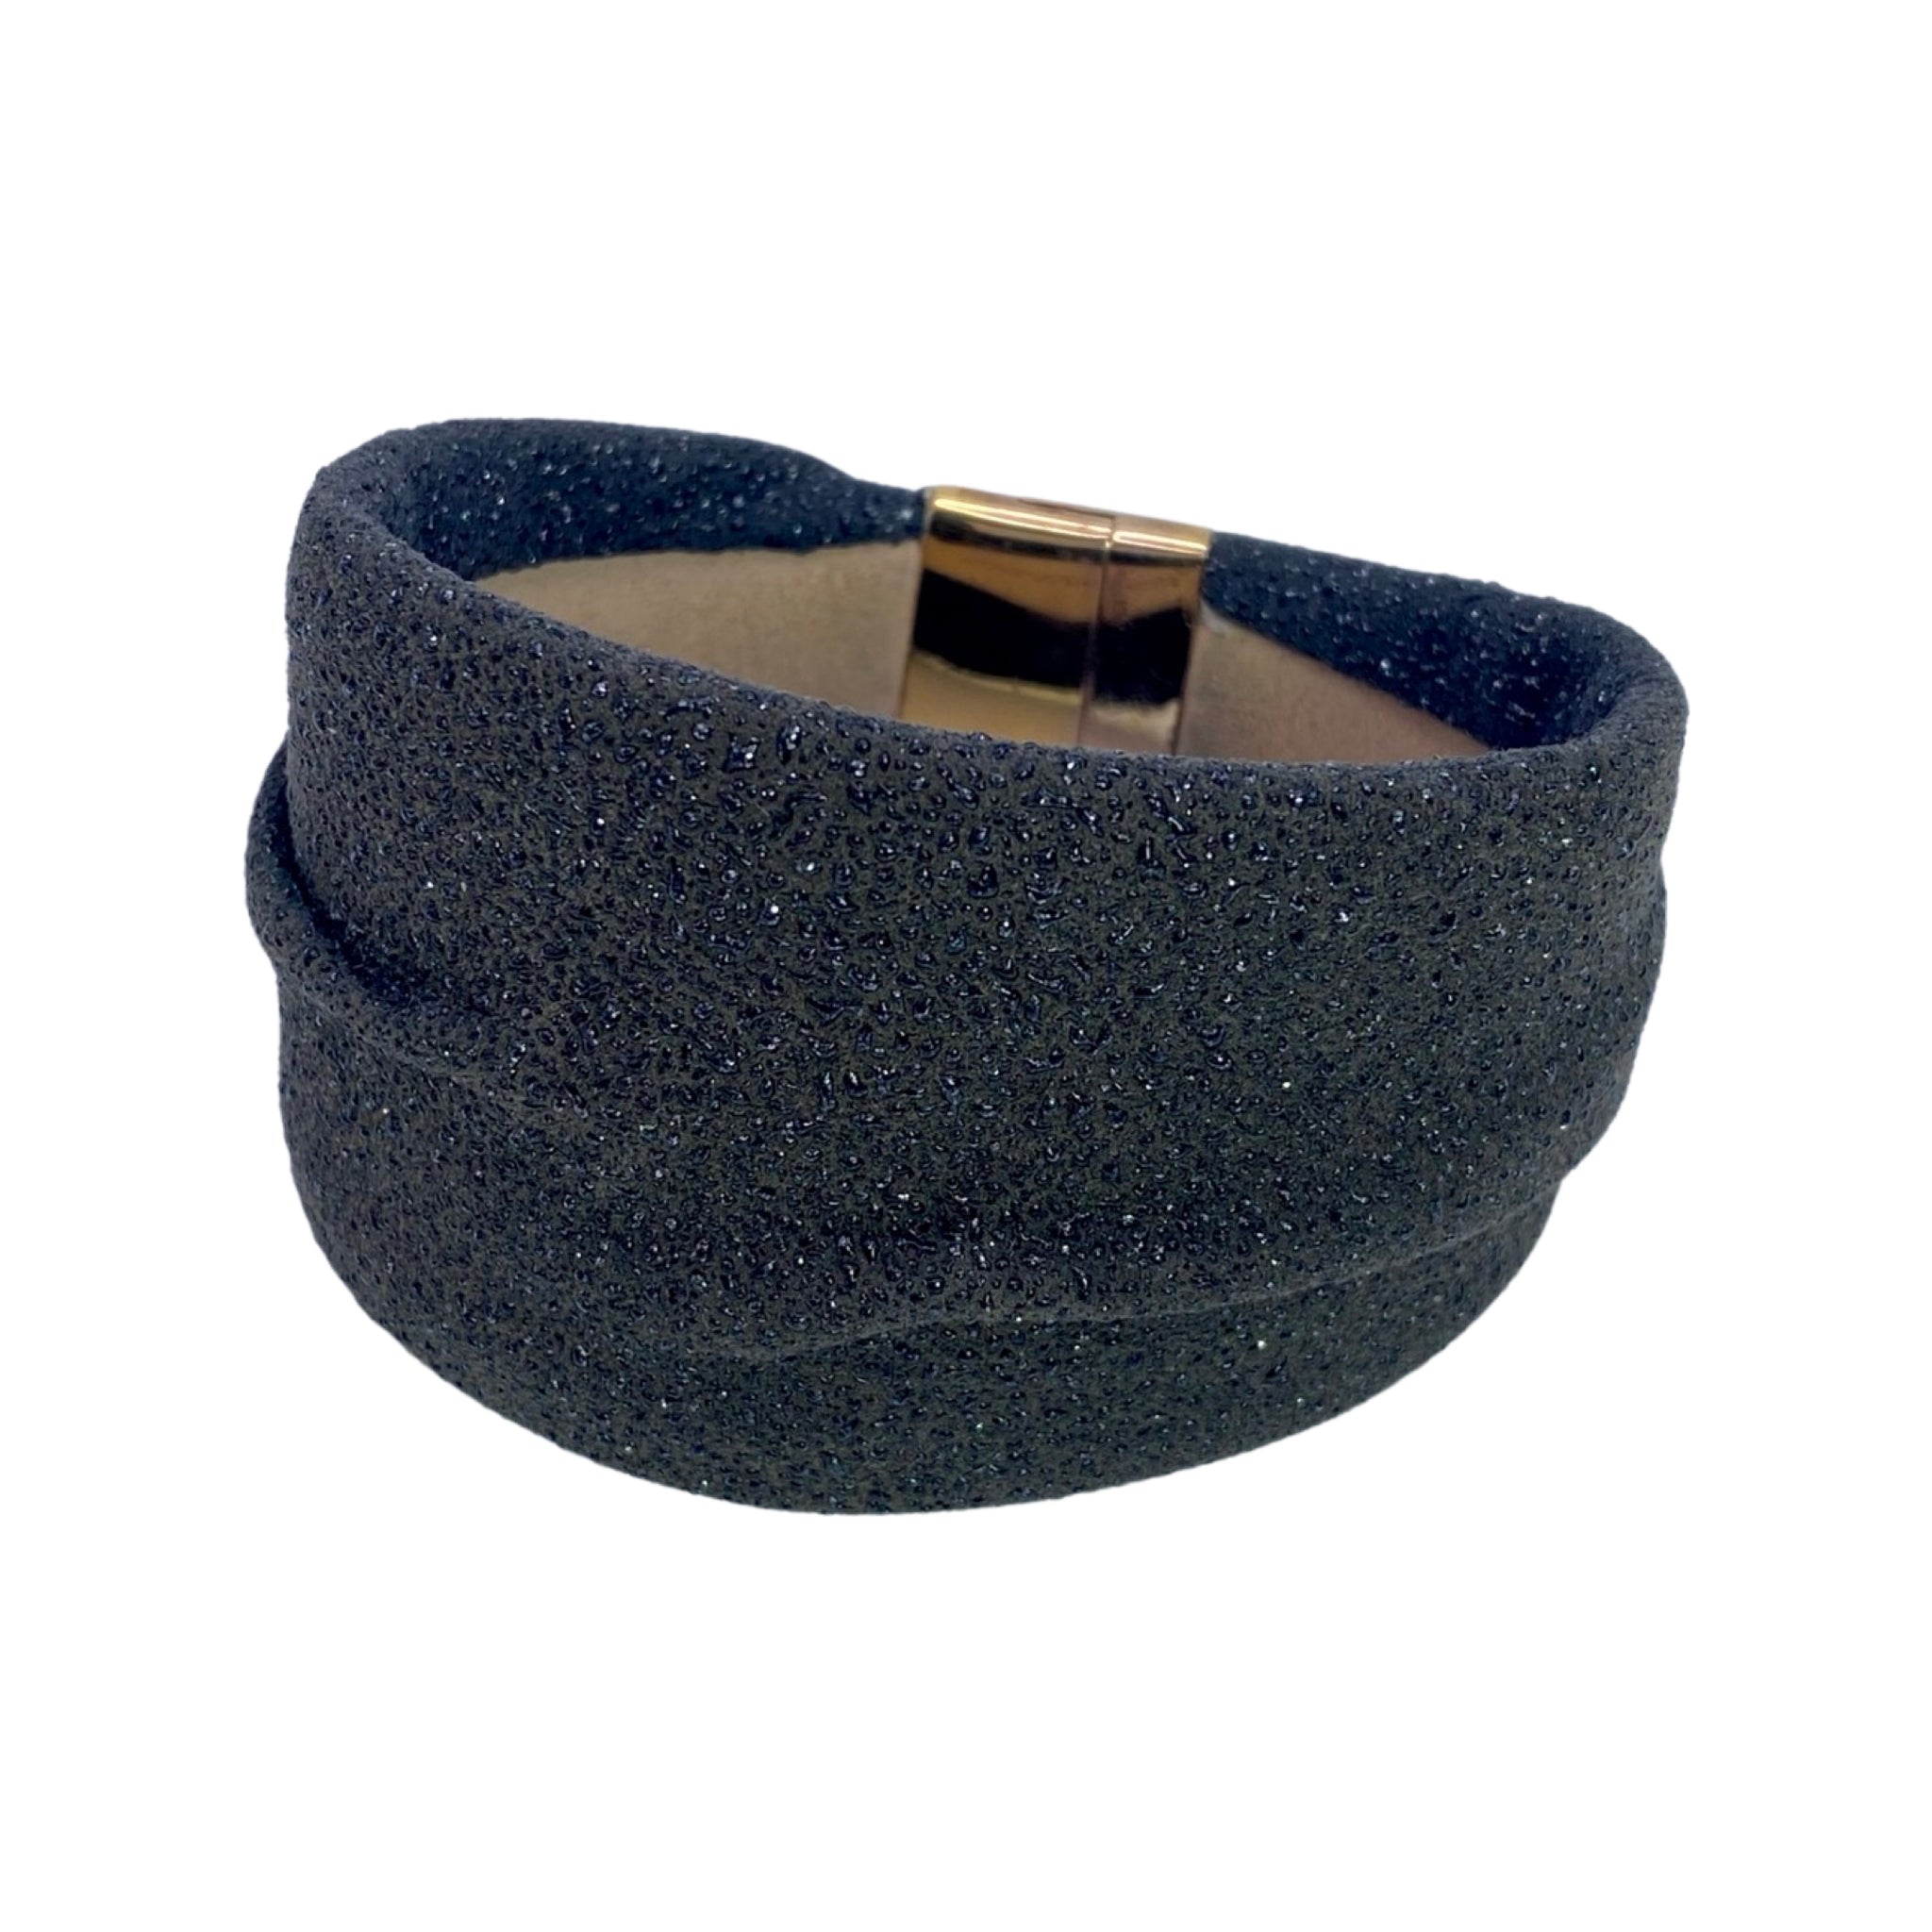 With a background in contemporary art, Marino Pesavento, shapes precious material into new forms creating real pieces of wearable art. His shagreen leather bracelet has an organic, sensuous look and feel and features a user-friendly magnetic clasp.  Available at Shaylula Jewlery & Gifts in Tarrytown, NY and online.   • Shagreen, 18k gold plated, magnetic clasp  • 7" L x 1.75" W  • Made in Italy